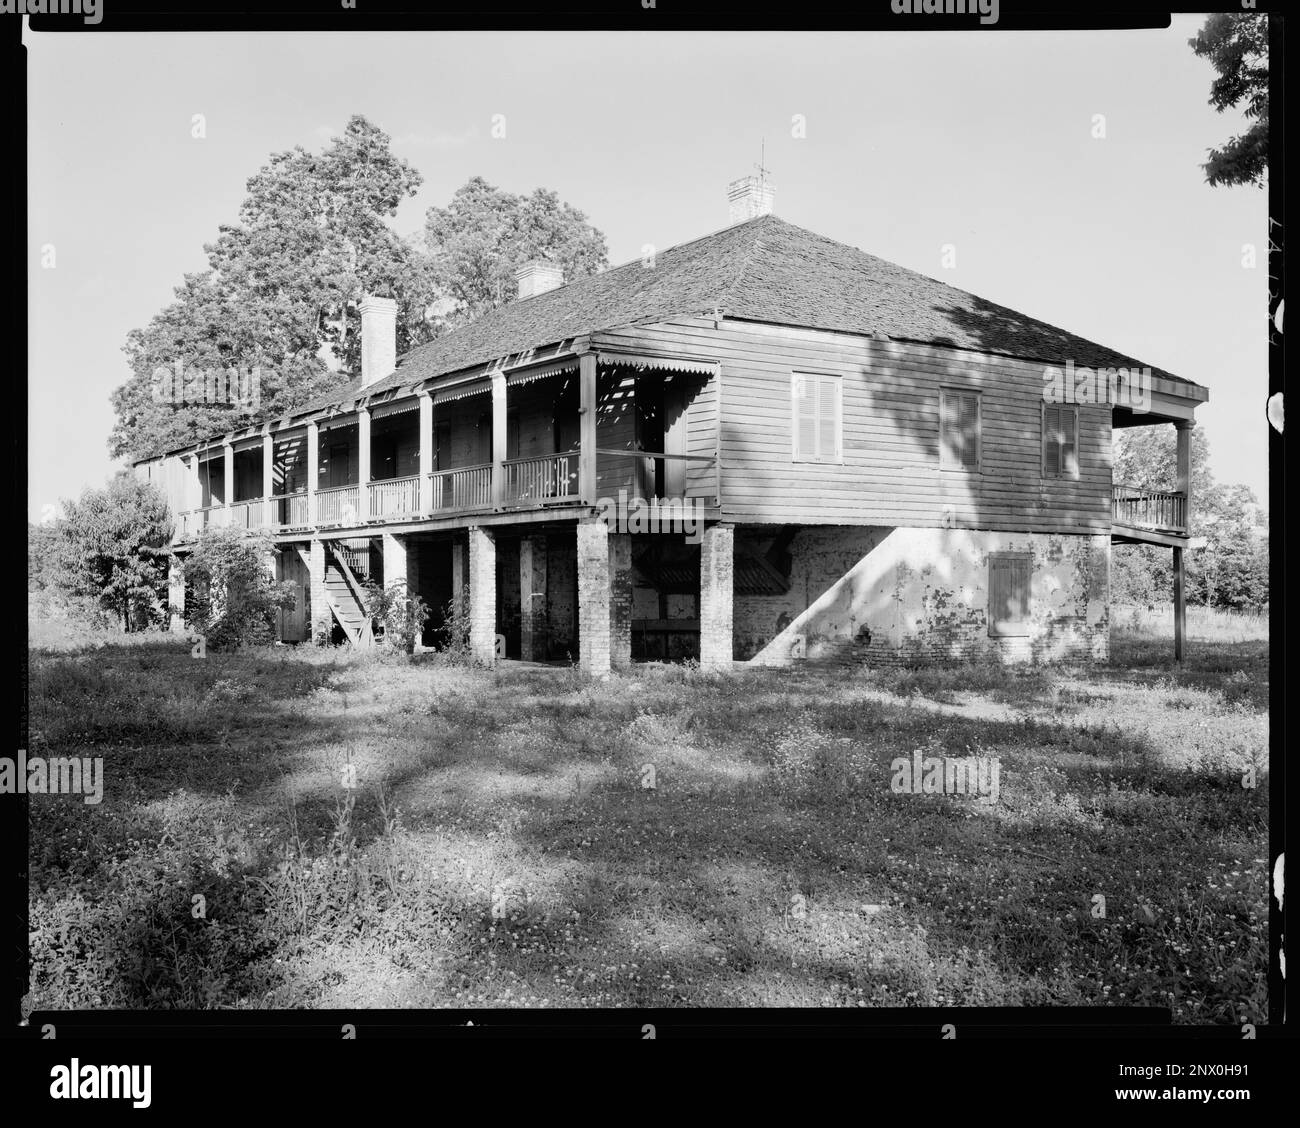 Montague or Montagut Plantation, Reserve, St. John the Baptist Parish, Louisiana. Carnegie Survey of the Architecture of the South. United States, Louisiana, St. John the Baptist Parish, Reserve,  Balconies,  Hand railings,  Hip roofs,  Houses,  Stairways. Stock Photo